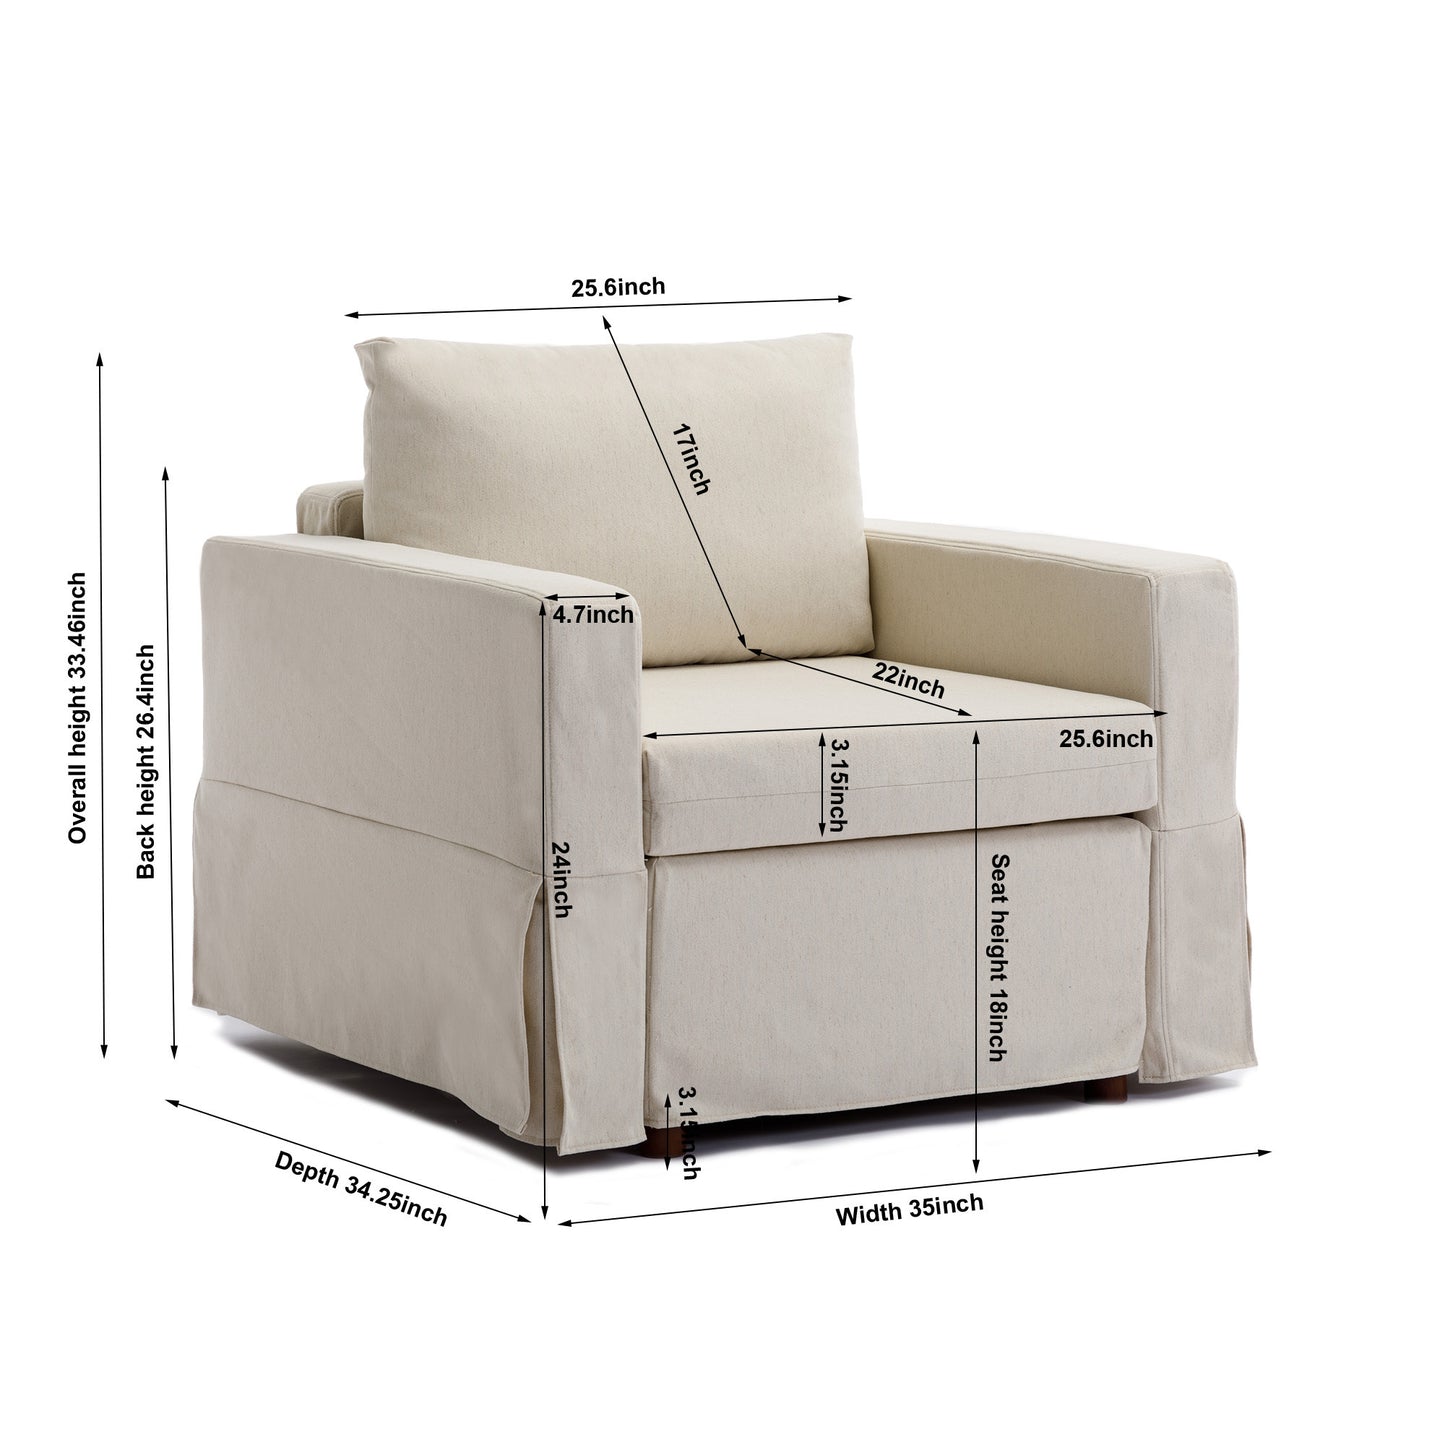 Single Seat Module Sofa Sectional Couch Seat Cushion and Back Cushion Removable and Washable,Cream